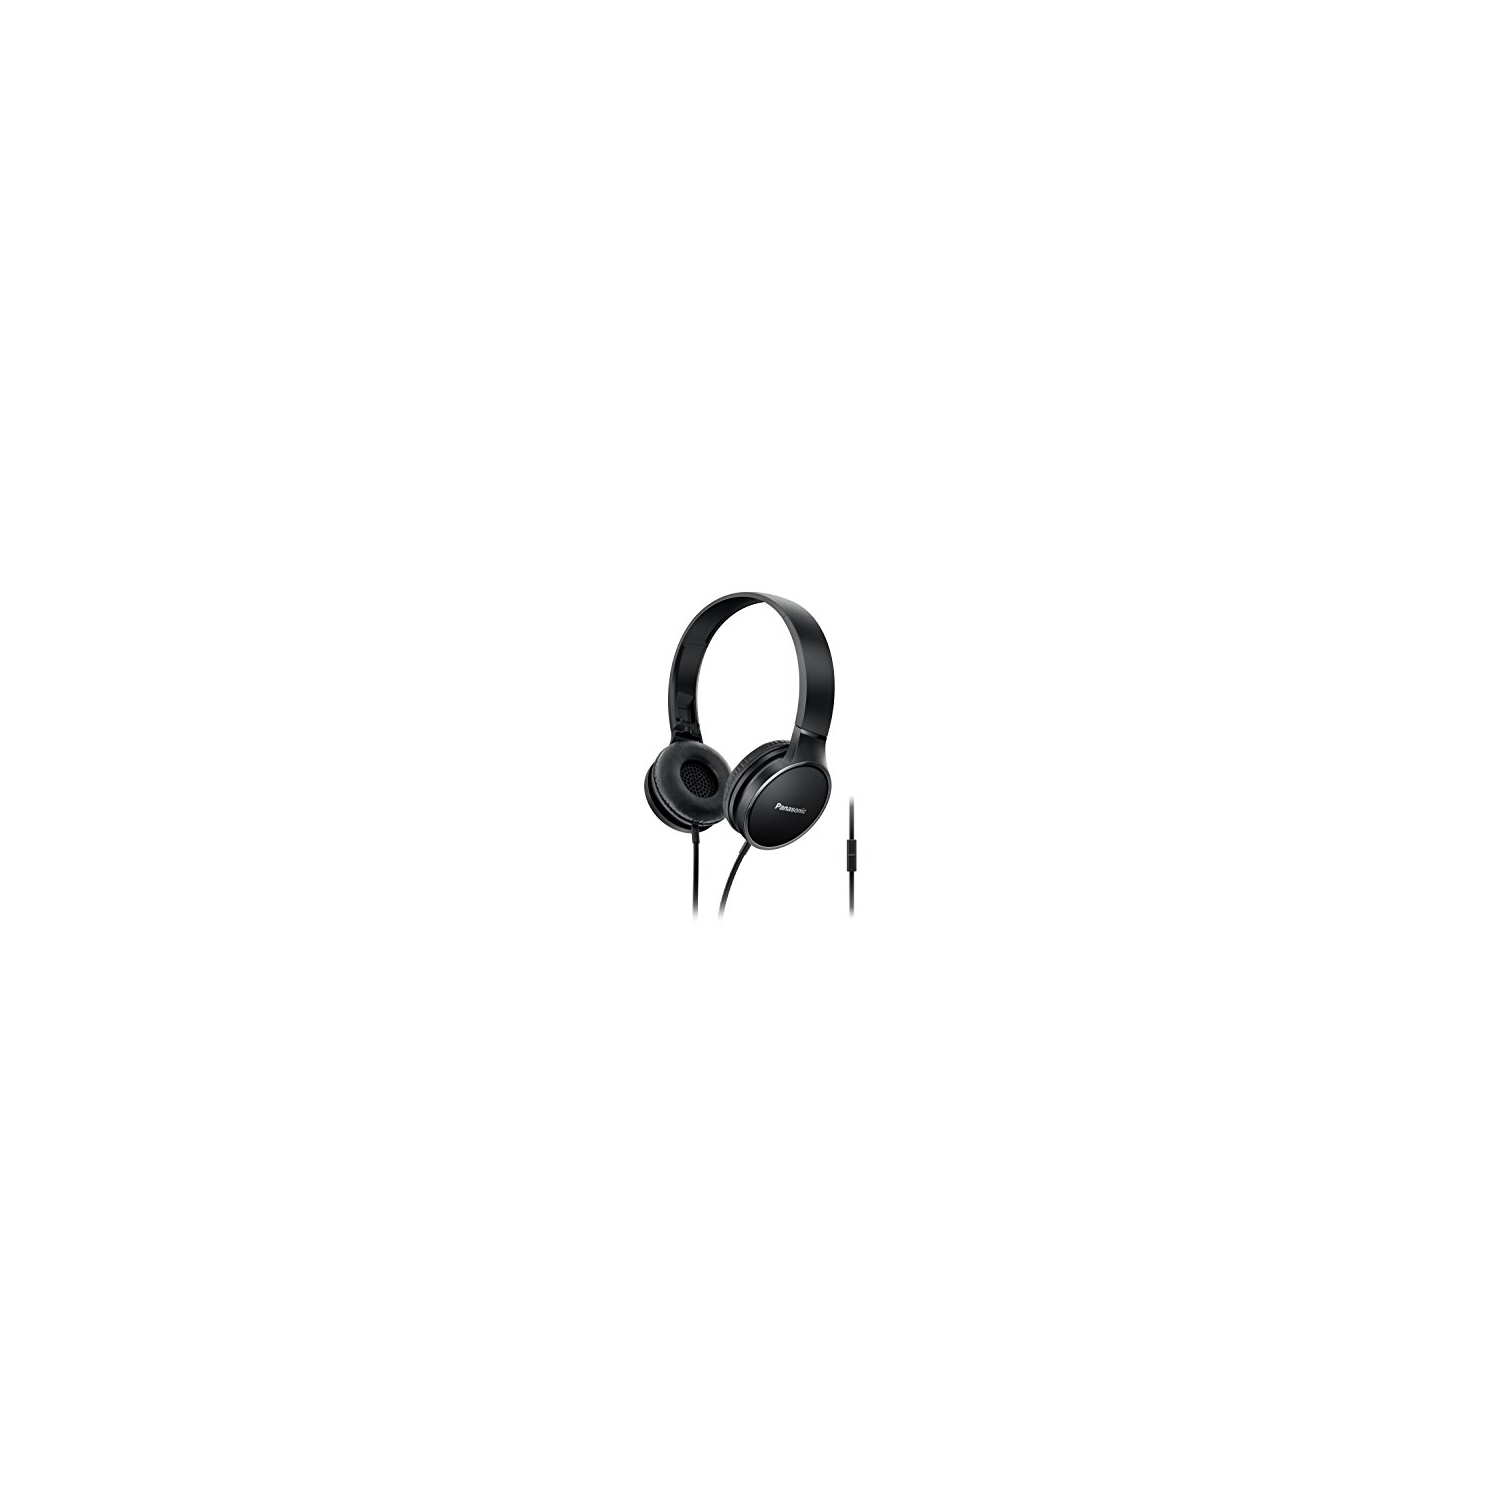 Panasonic Premium Sound On Ear Stereo Headphones RP-HF300M-K with Integrated Mic and Controller, Tra